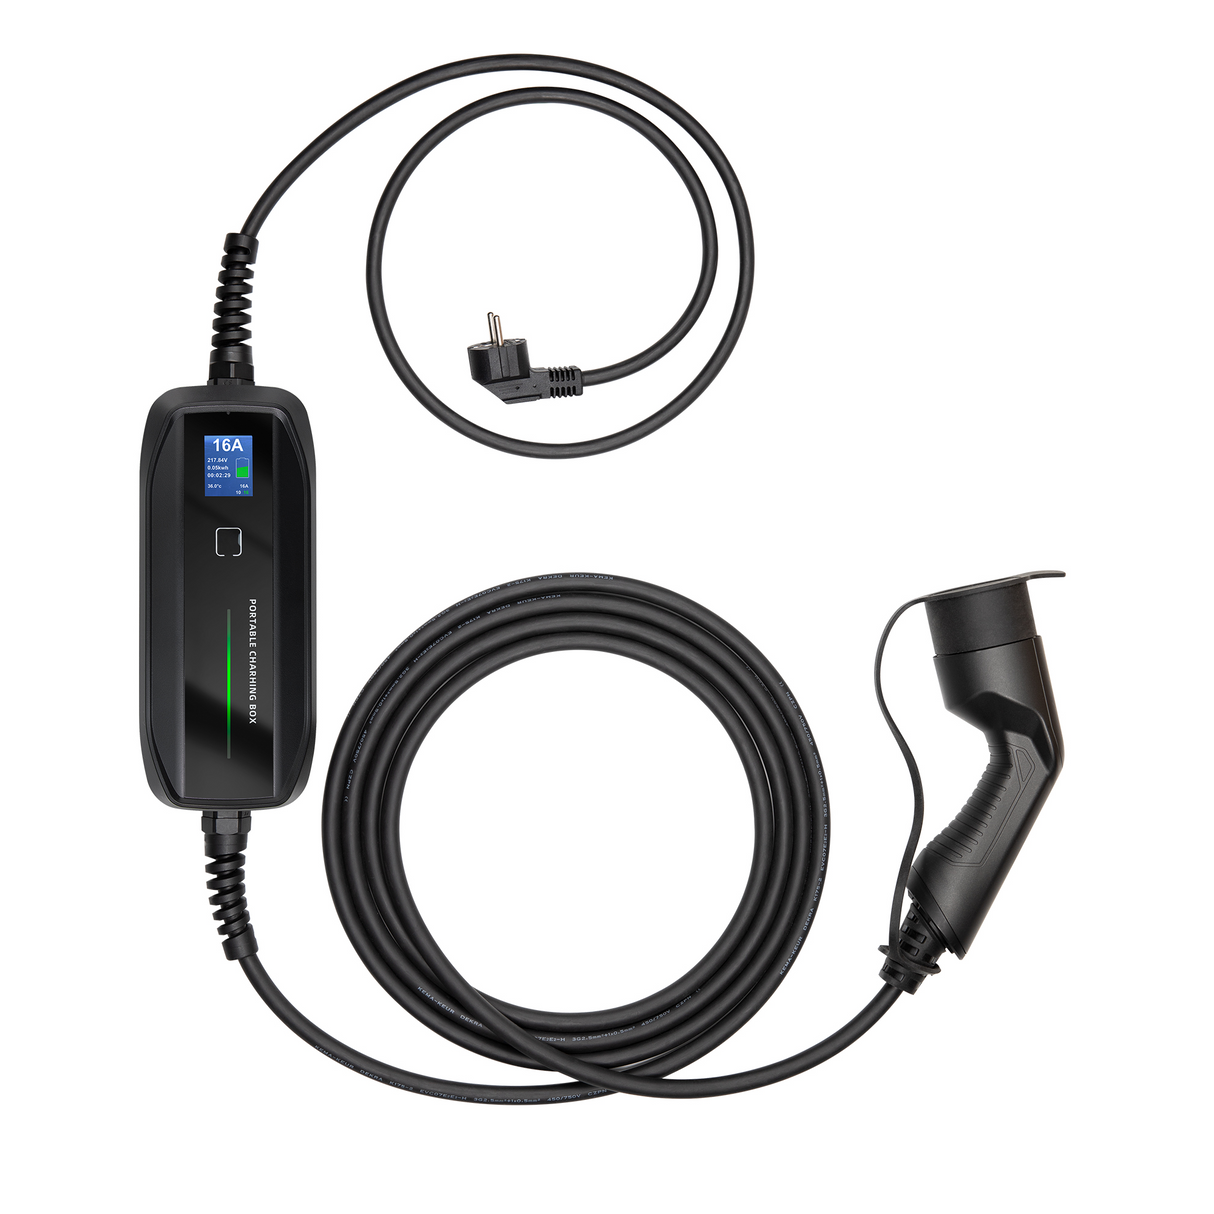 Mobile Charger Opel Vivaro-e Combi - Besen with LCD - Type 2 to Schuko